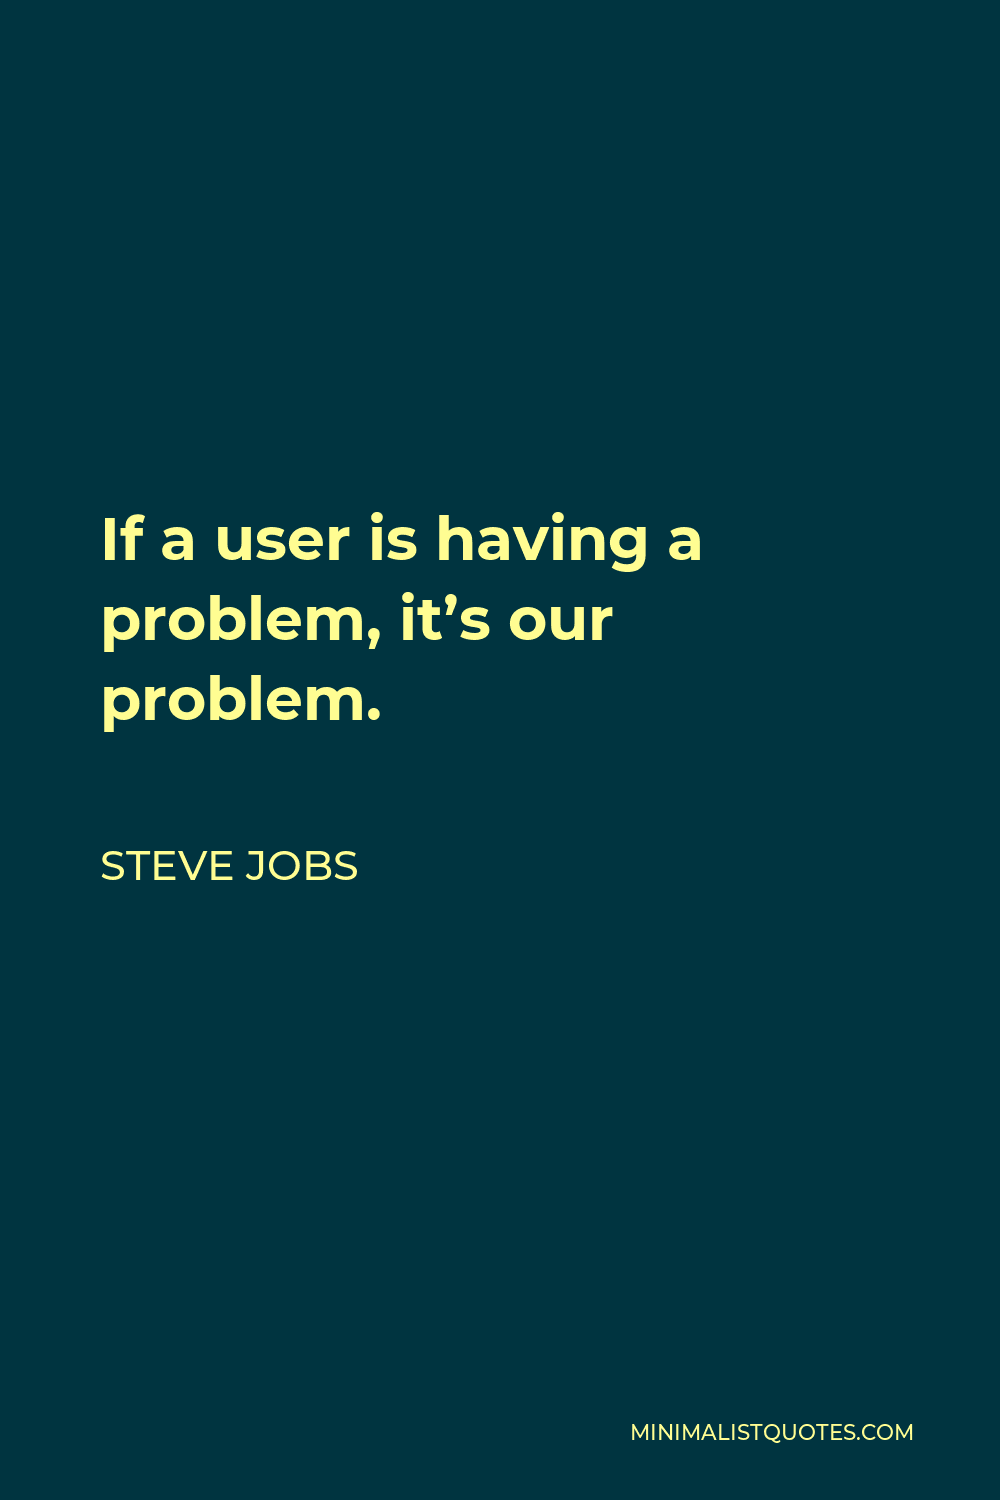 Steve Jobs Quote - If a user is having a problem, it’s our problem.